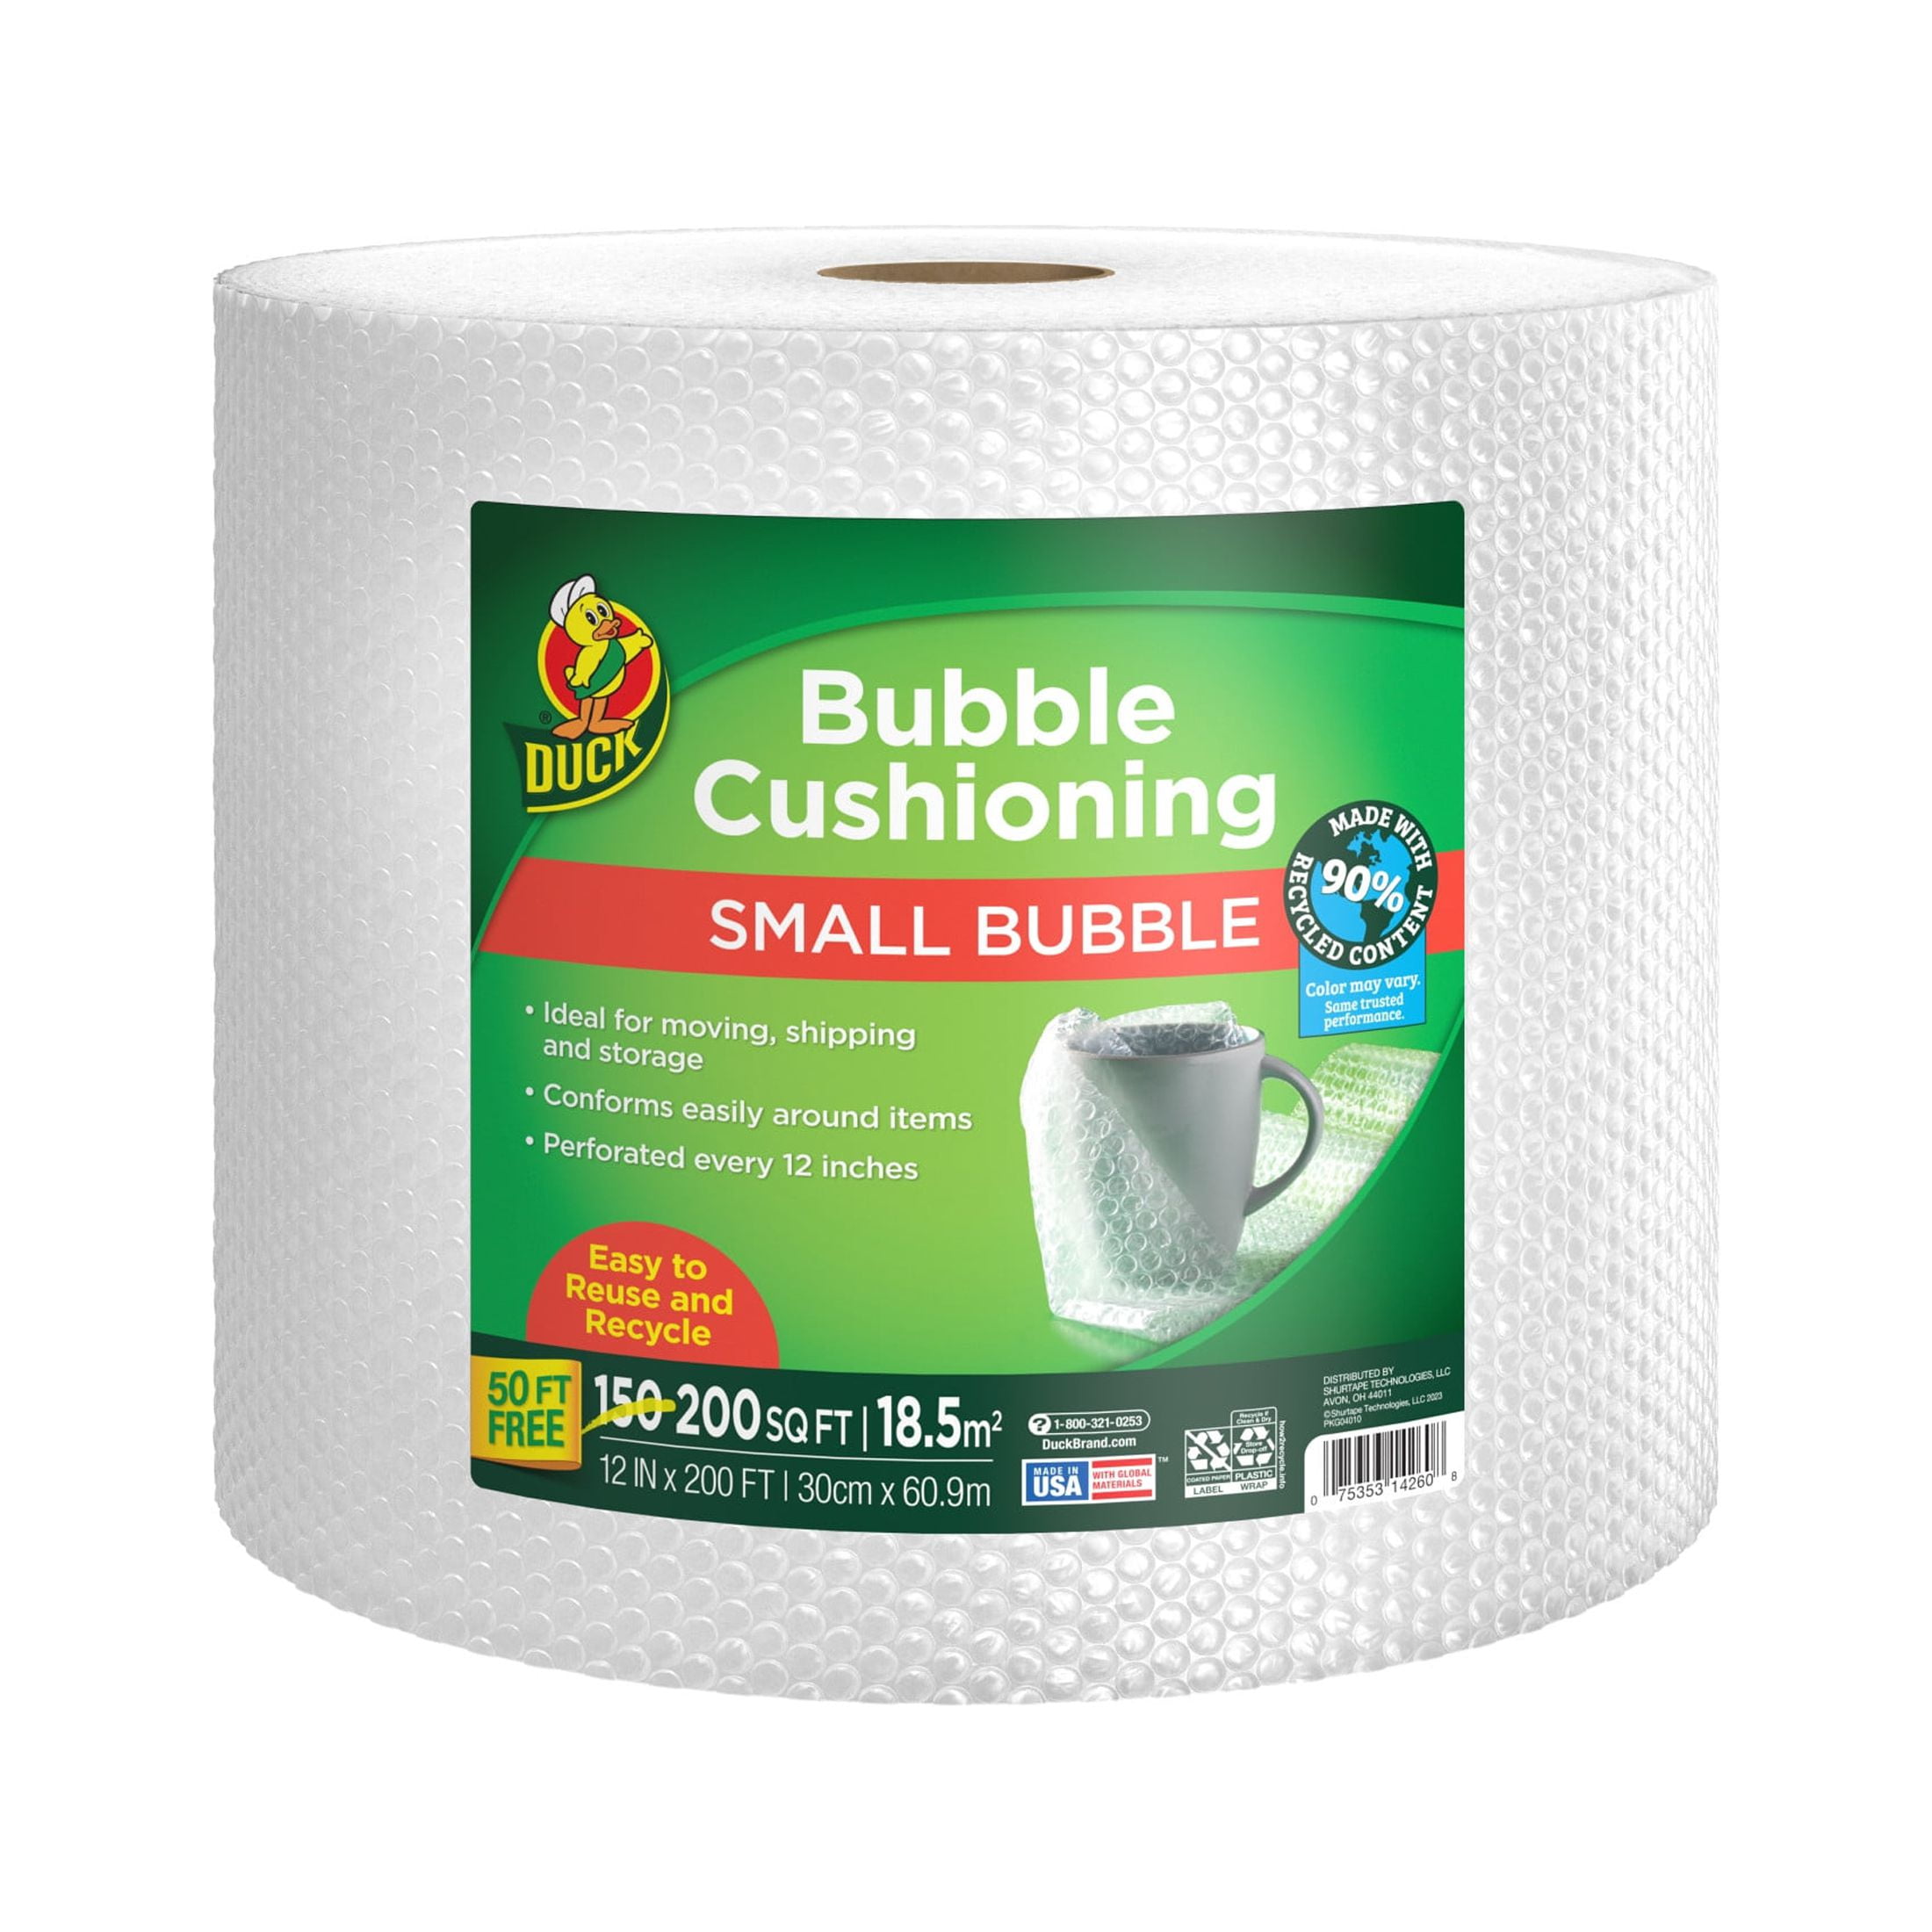  15 FT Duck Max Strength Bubble Cushioning Wrap for Moving &  Shipping - Heavy Duty Protection, Clear Bubble Roll Perforated Every 12 IN  : Large Packing Boxes : Office Products